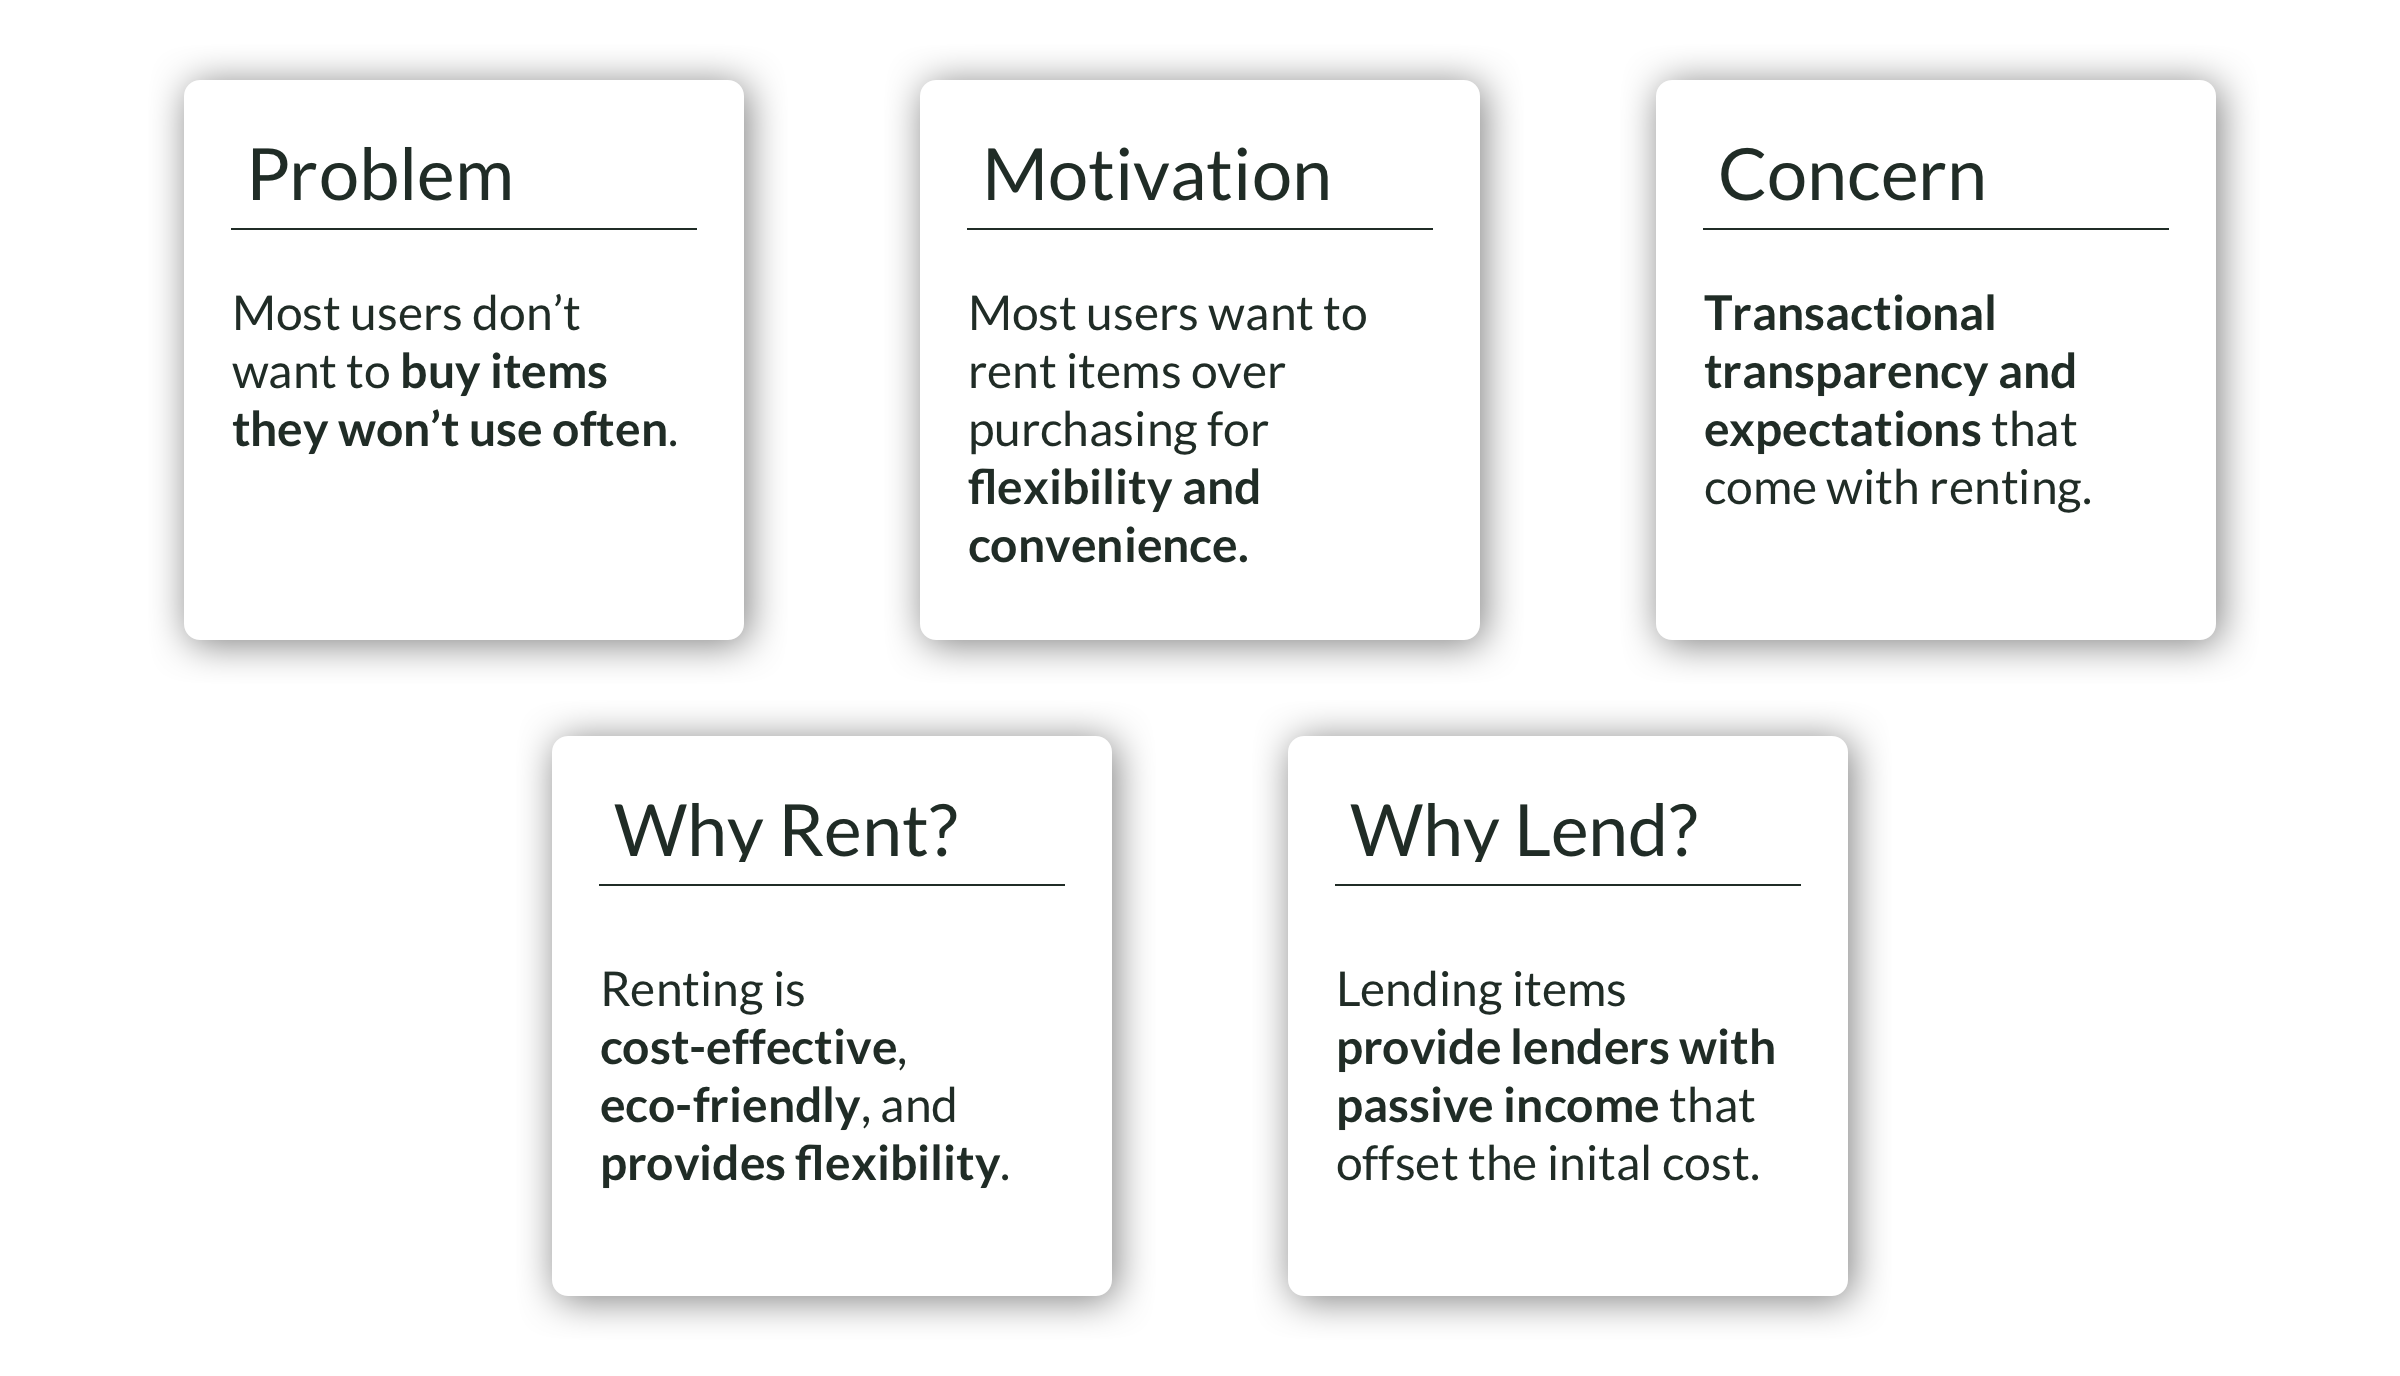 User Interview Insights. 1) Most users don't want to buy items they won't use often. 2) The majority of users want to rent an item over buying it to save money and space. 3) Transactional transparency and expectations for all our users when renting. 4) Renting can be more cost-effective, is more eco-friendly, and provides flexibility. 5) Lending provides lenders with passive income, that interest all our users.